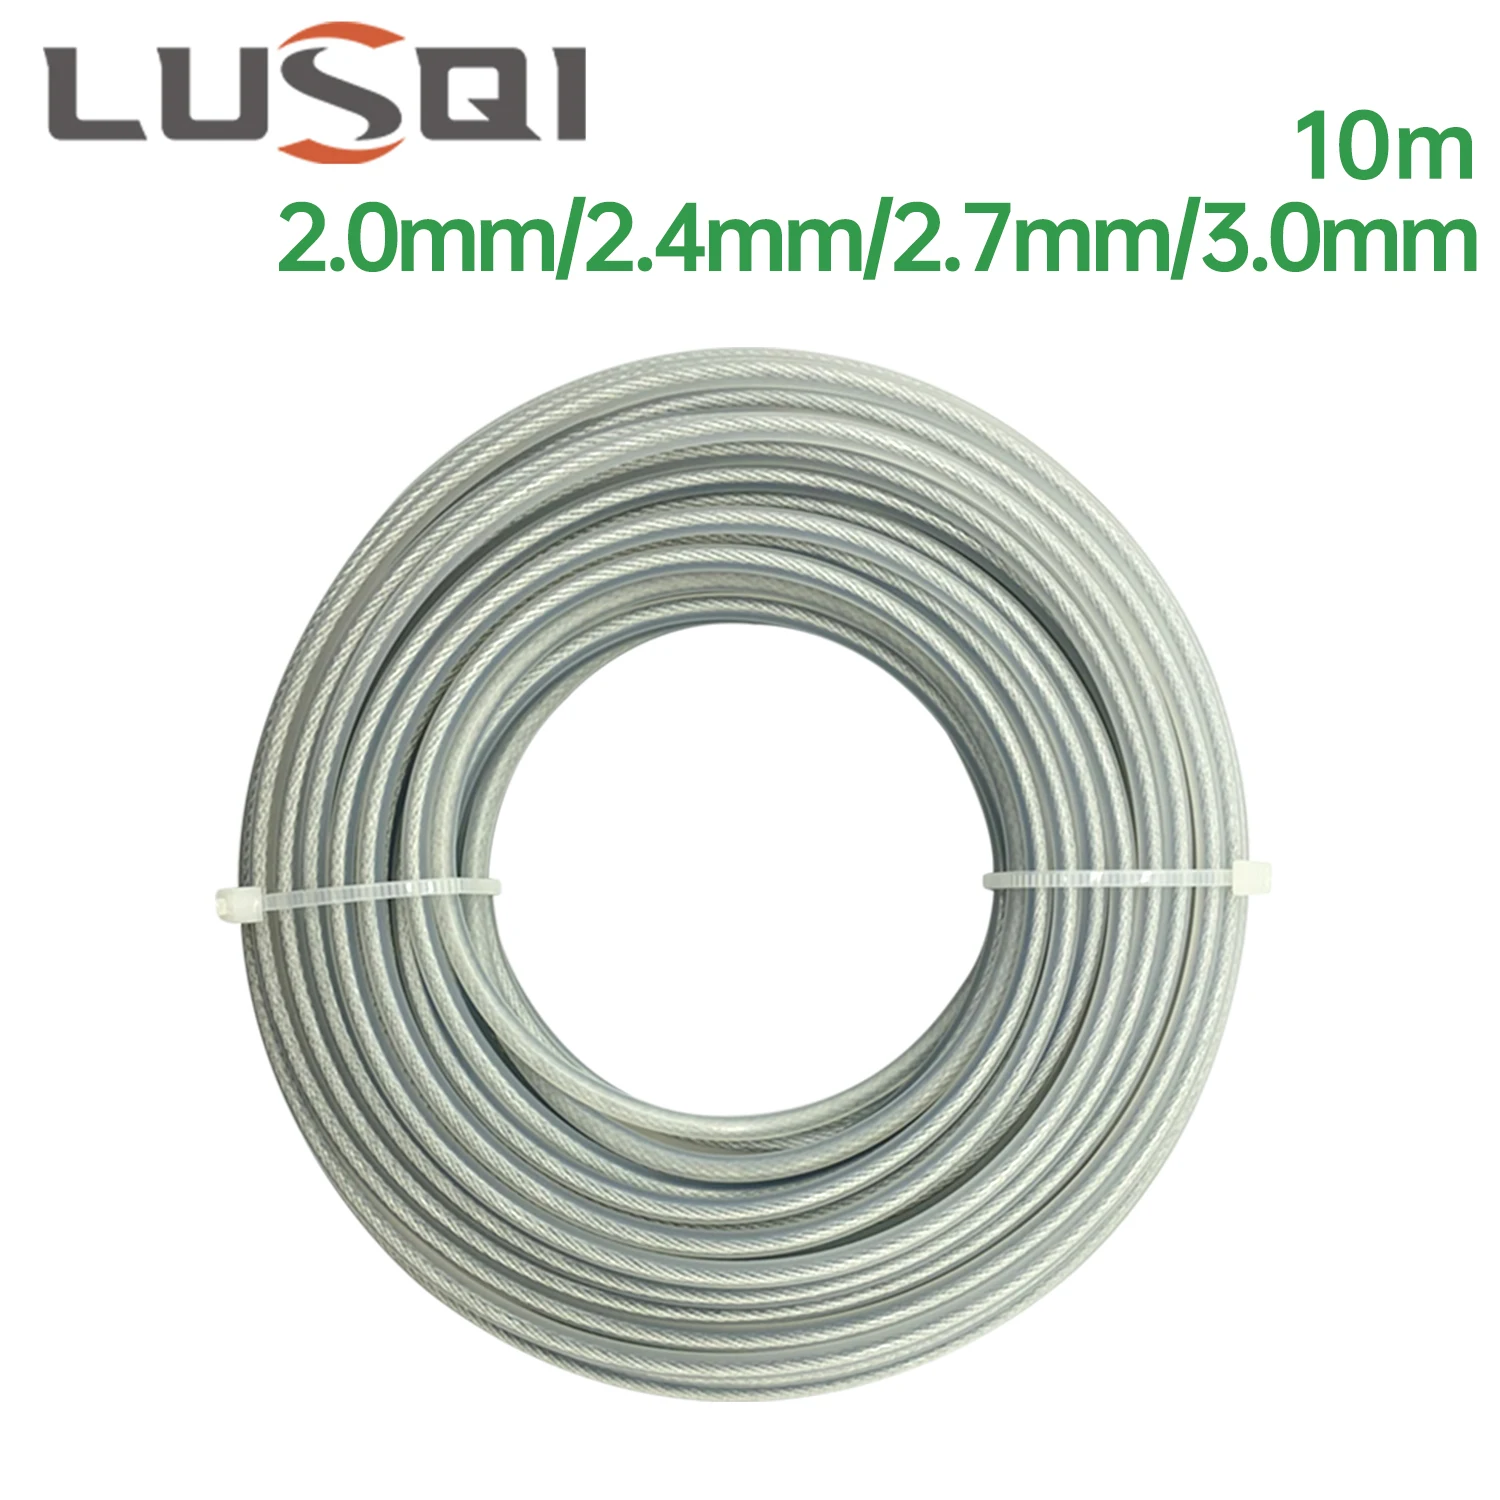 

LUSQI 10m*2mm/2.4mm/2.7mm/3mm Steel Wire Nylon Grass Trimmer Line Lawn Mower Cord Long Round Roll Grass Replacement